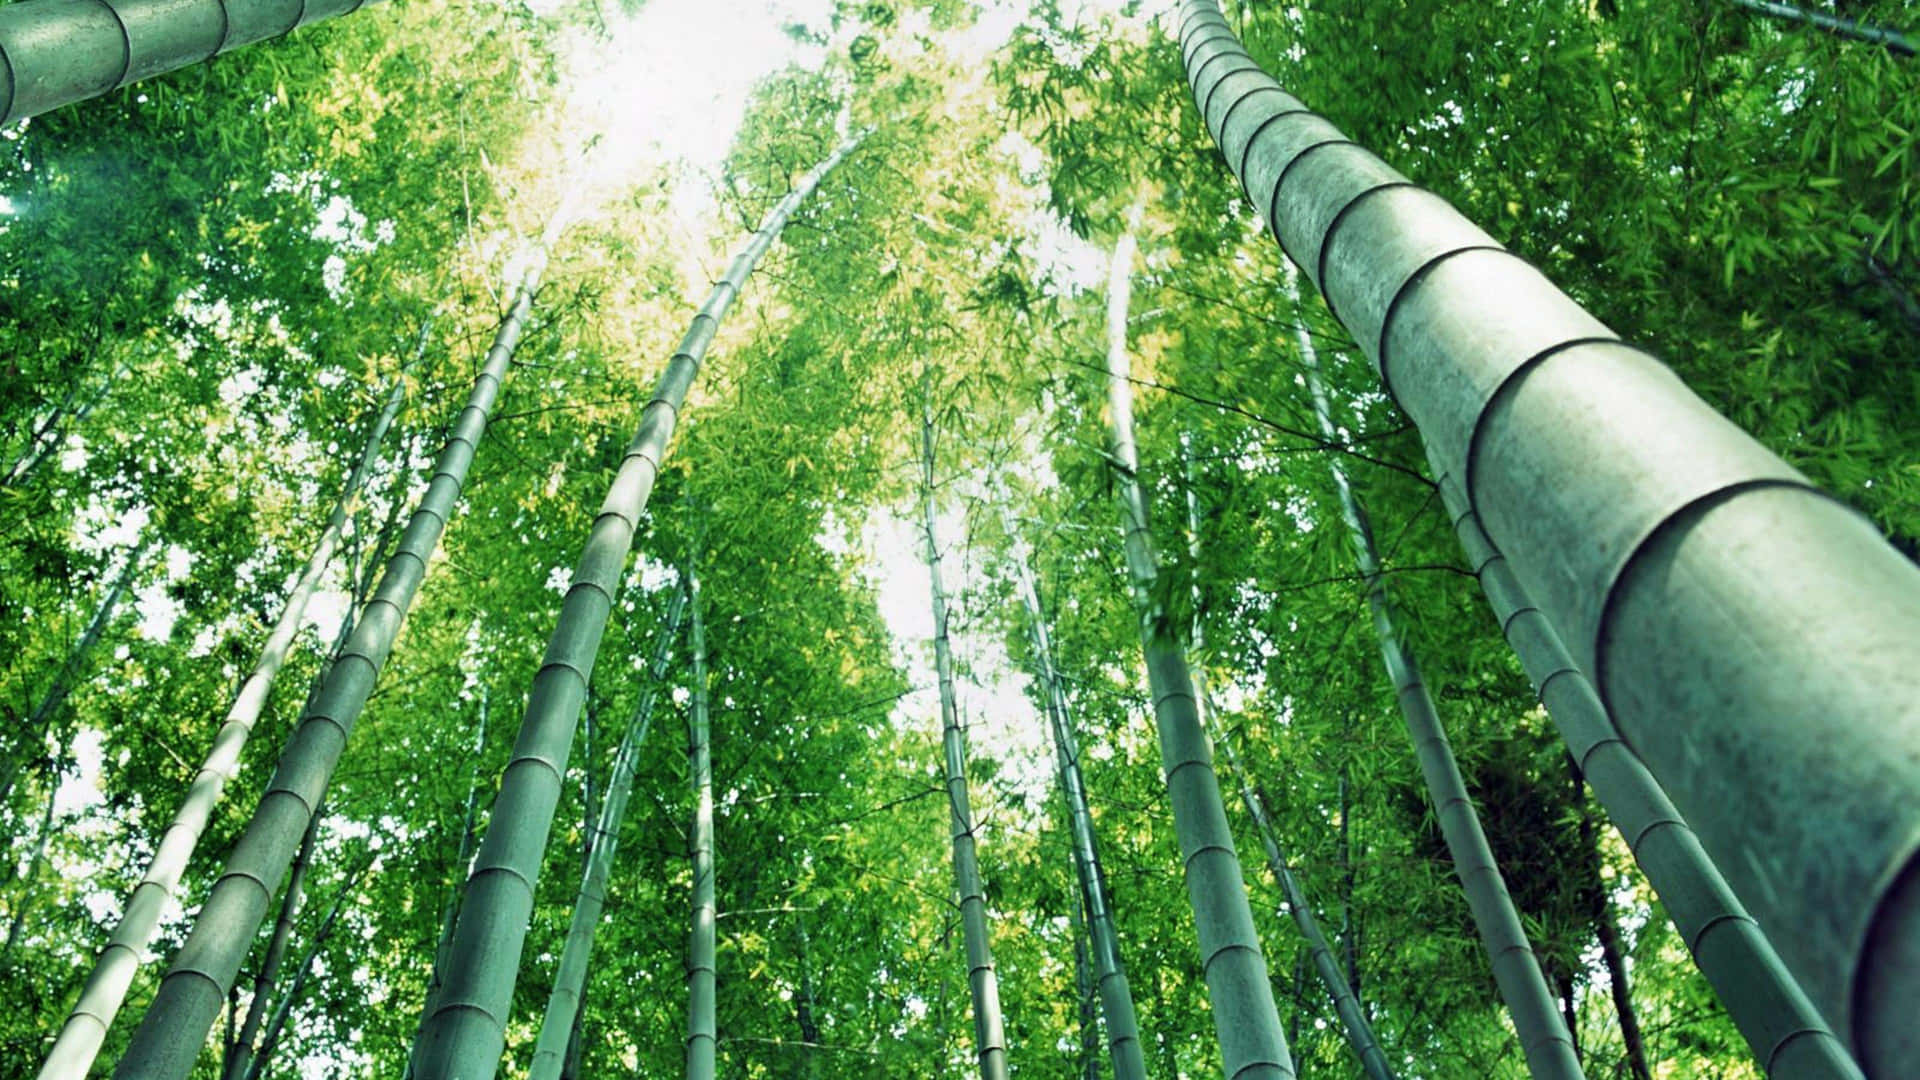 "A Stately Tianmu Bamboo Growing in China" Wallpaper